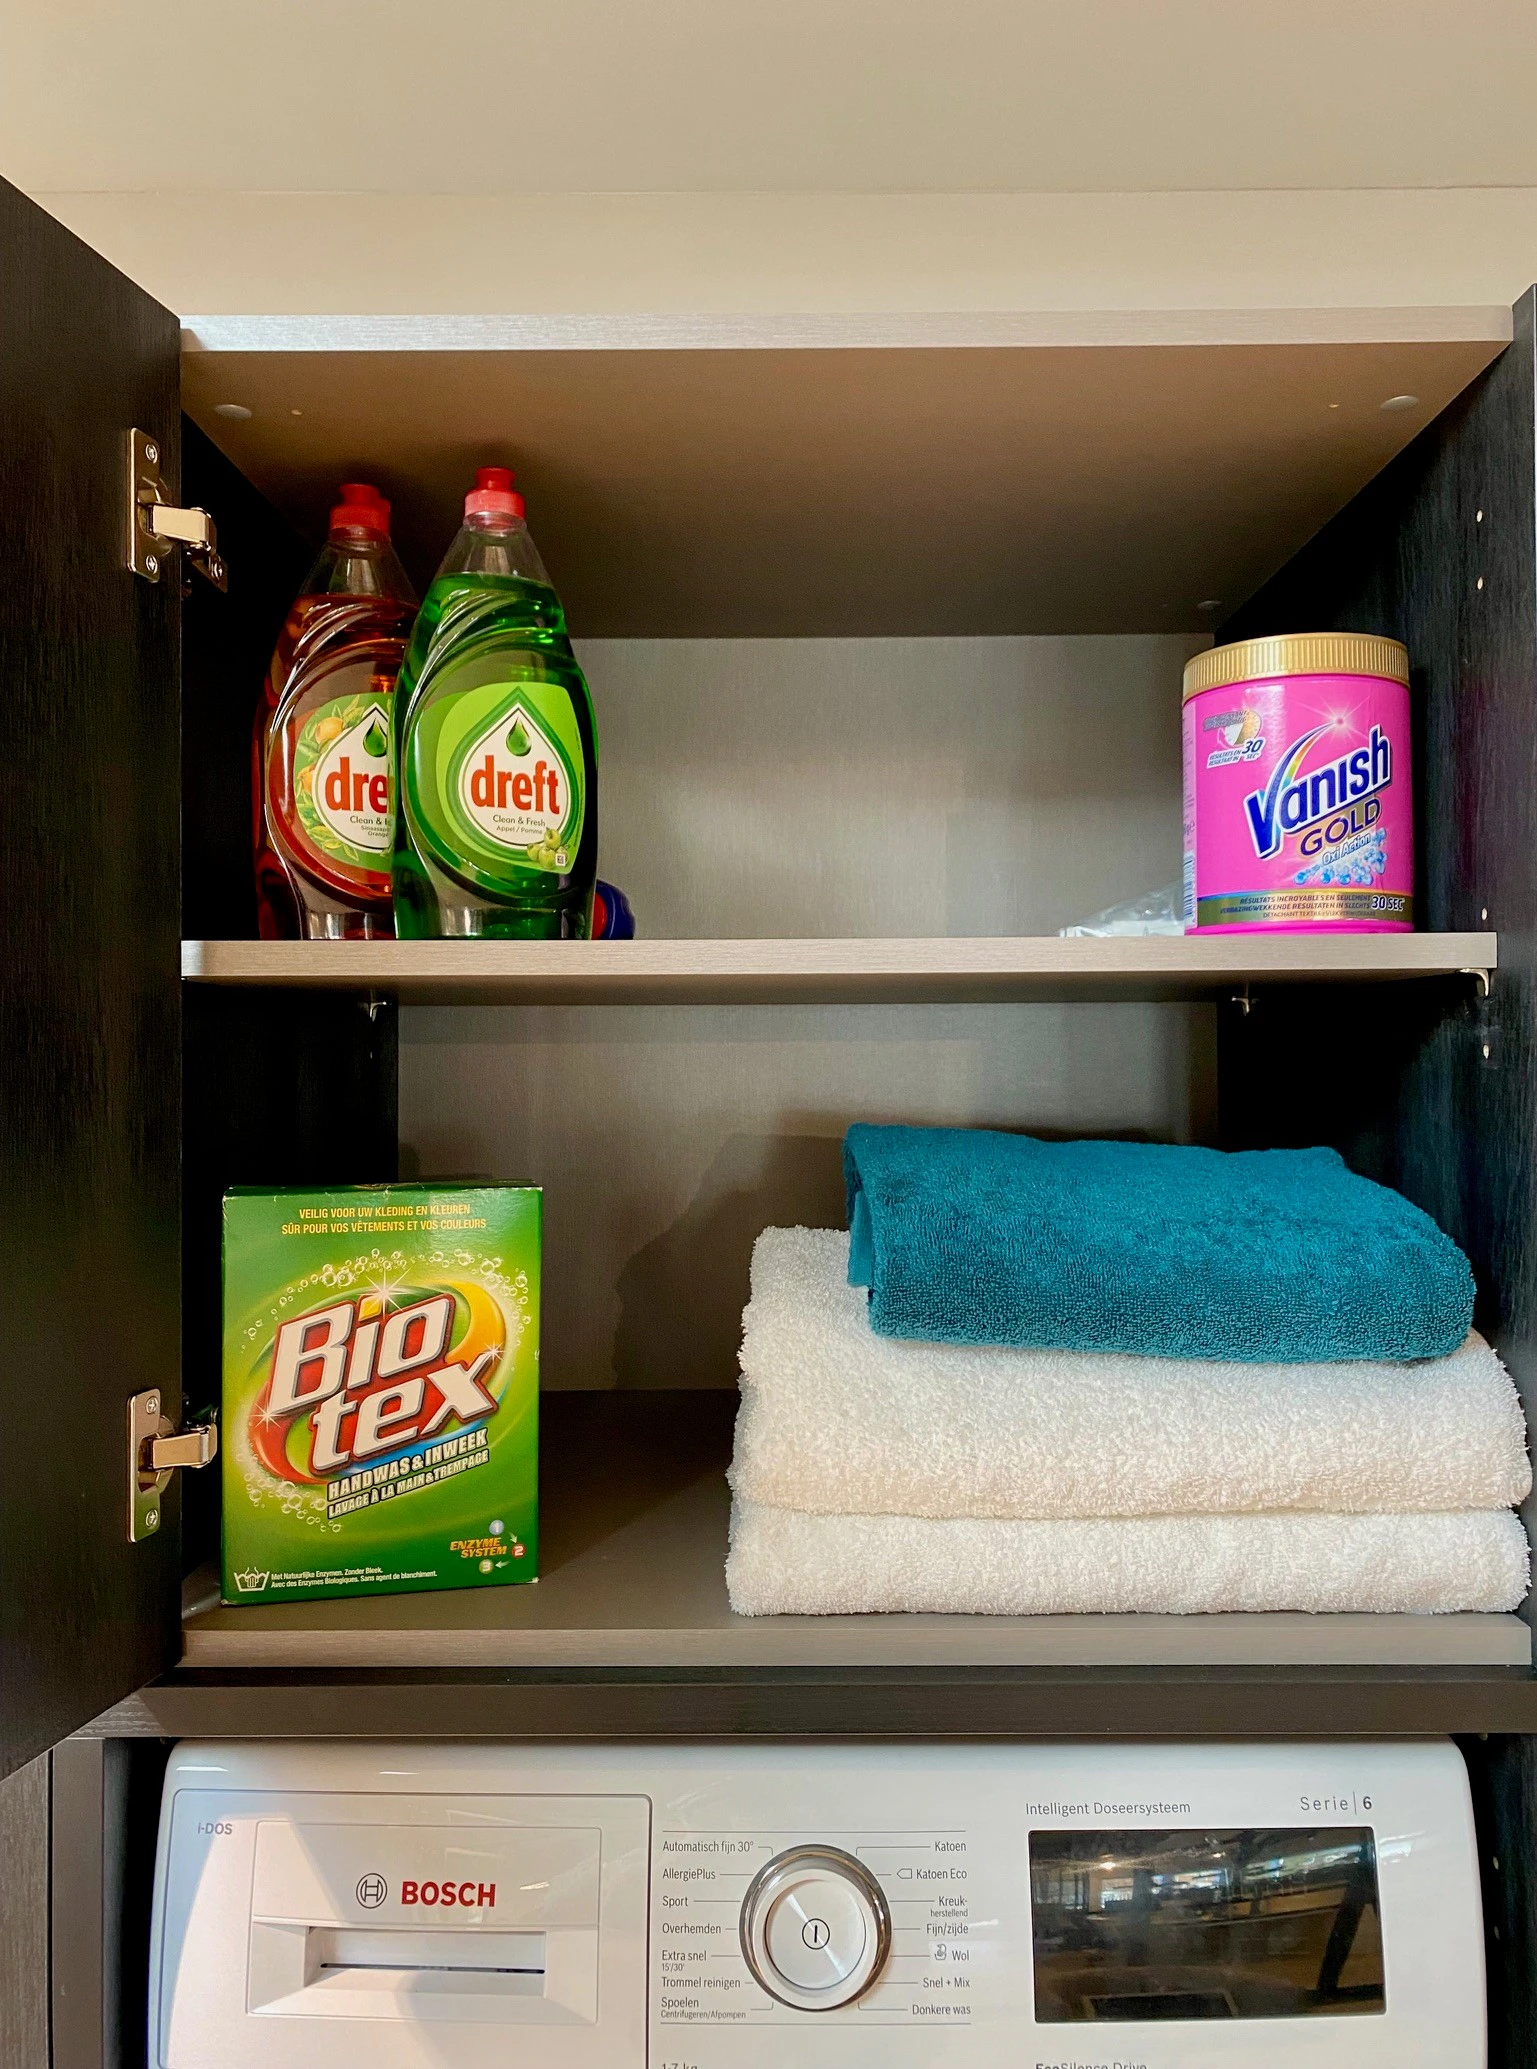 Lifestyle picture of top cupboard open showing cleaning detergents and towels